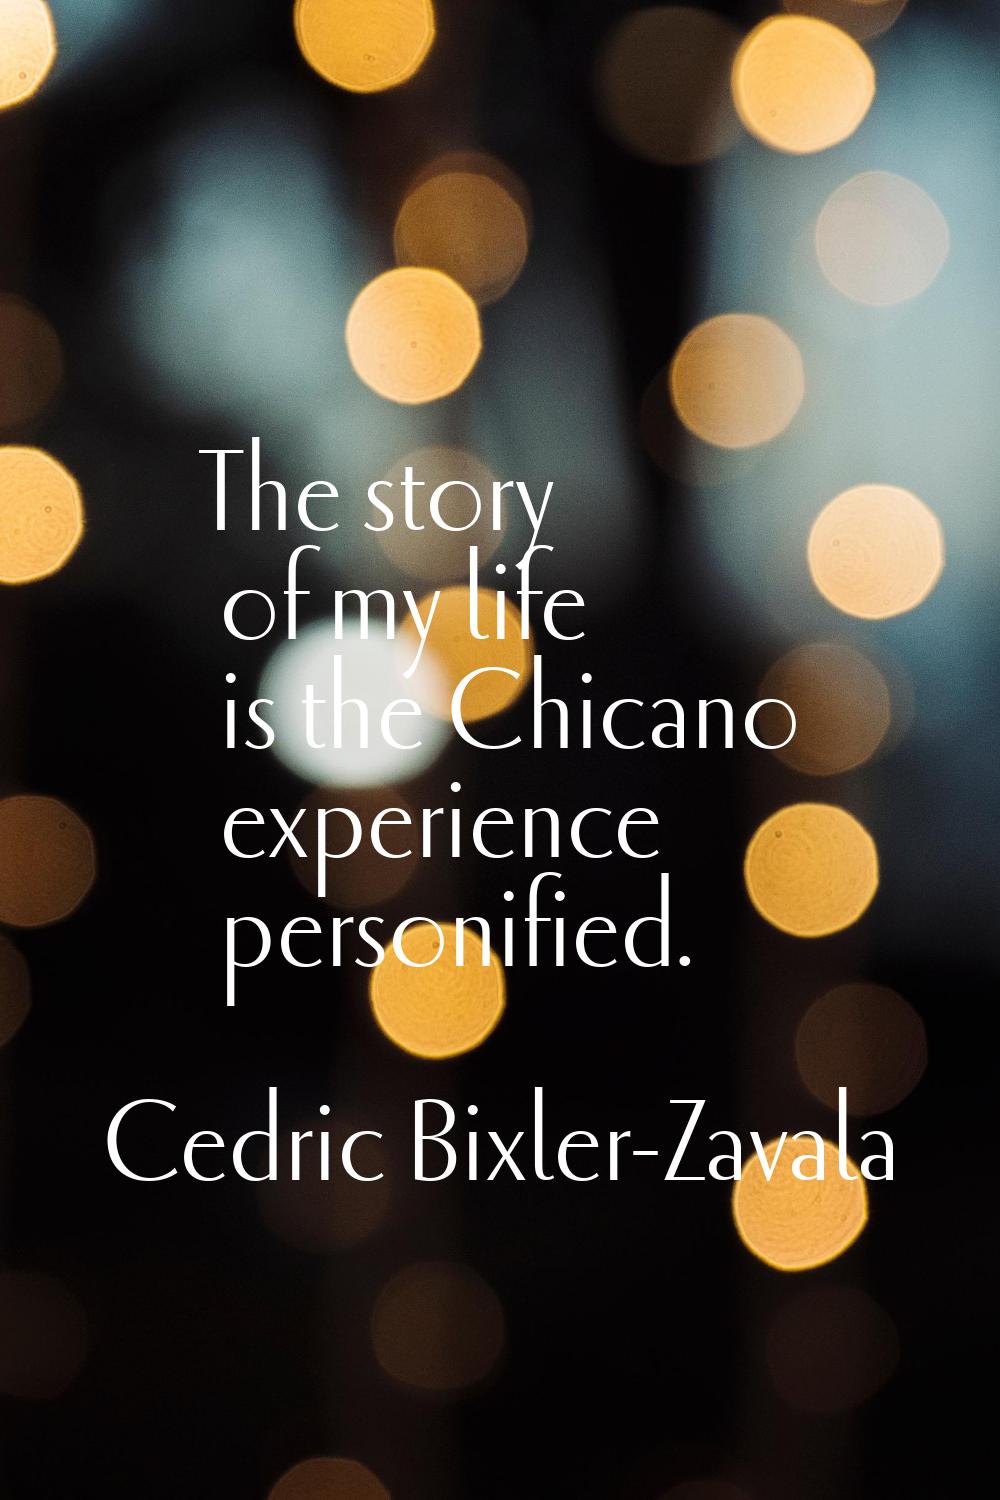 The story of my life is the Chicano experience personified.